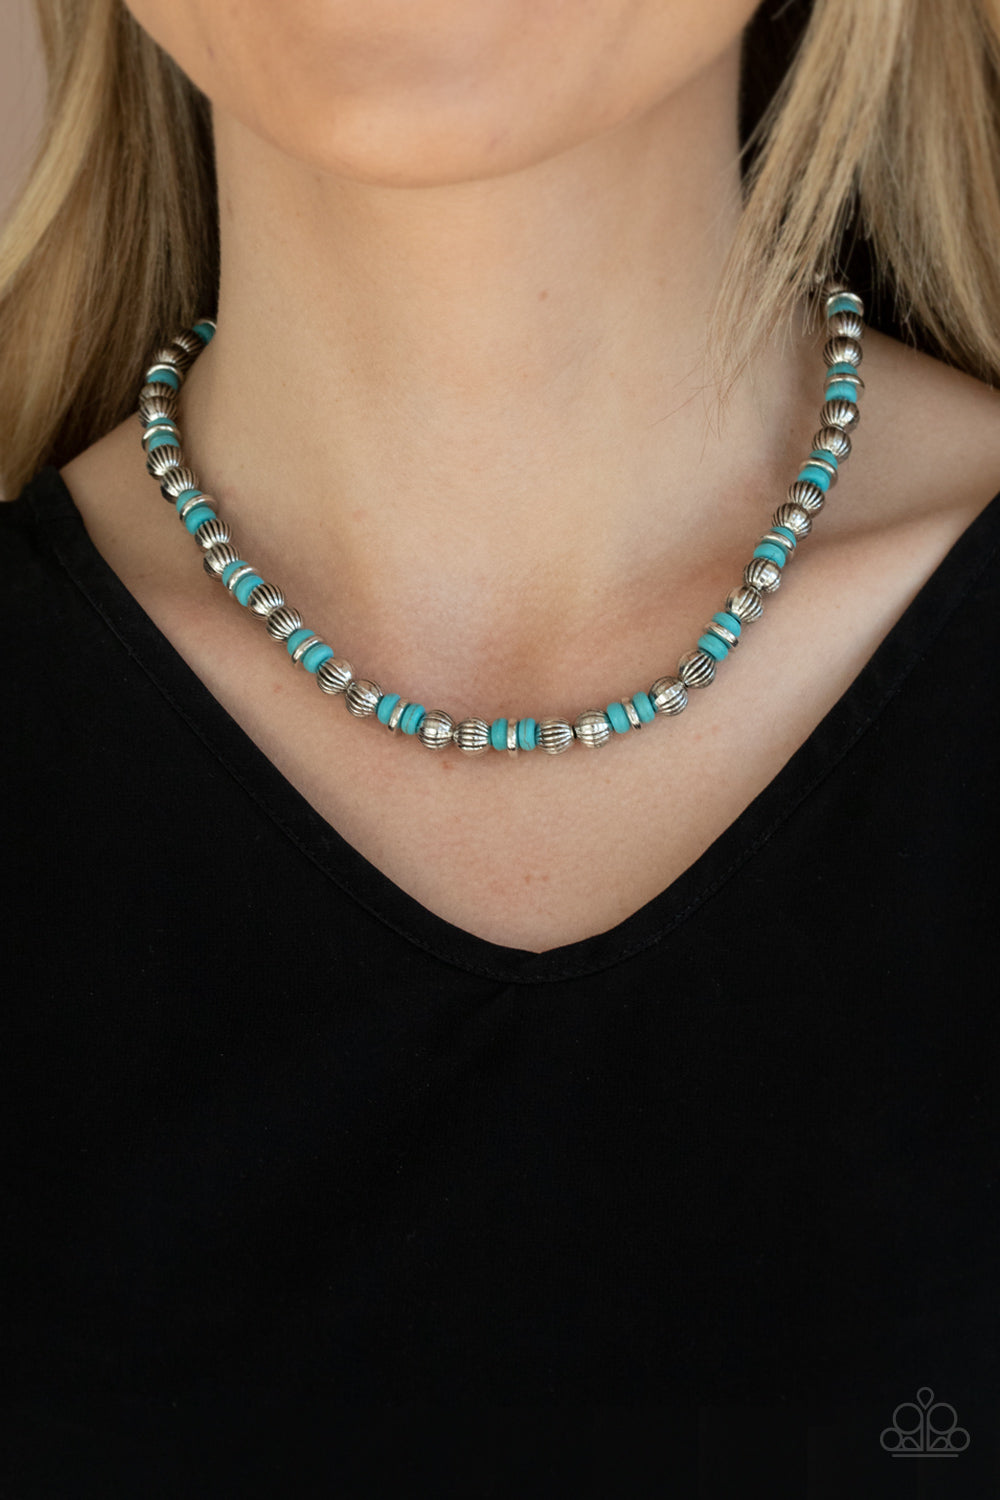 PRE-ORDER - Paparazzi ZEN You Least Expect It - Blue Turquoise Stone - Necklace & Earrings - $5 Jewelry with Ashley Swint